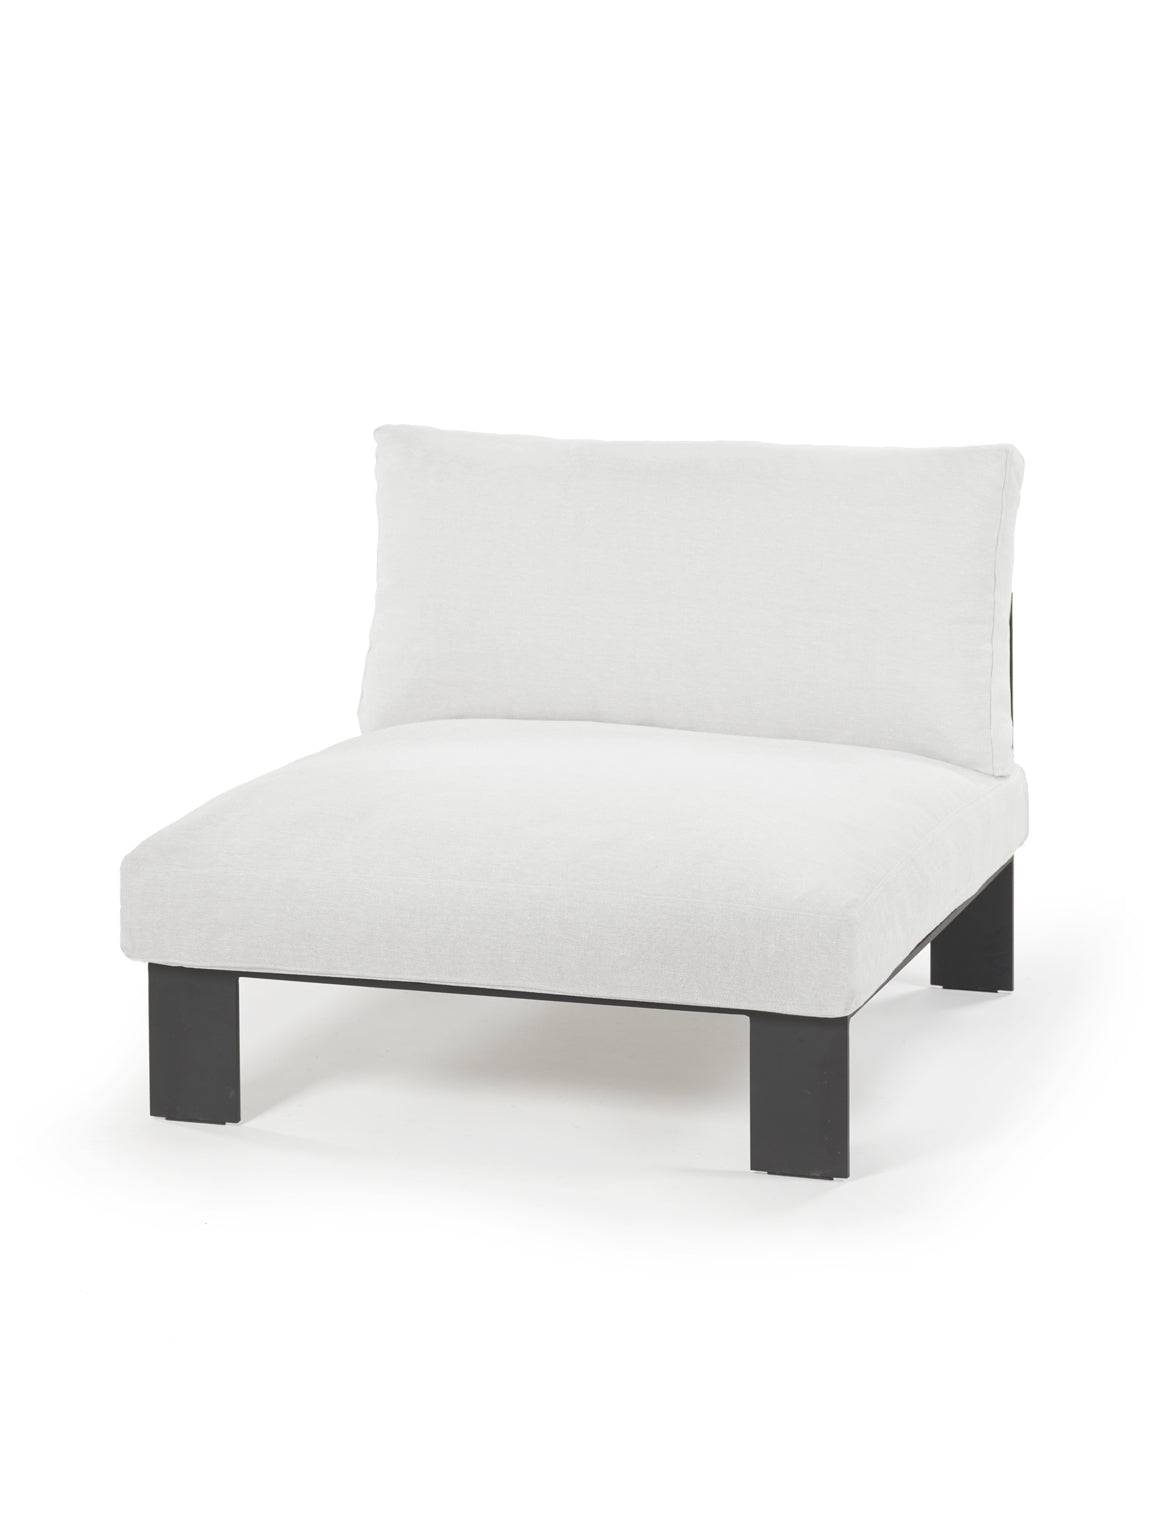 Mombaers Outdoor Lounge Chair - White